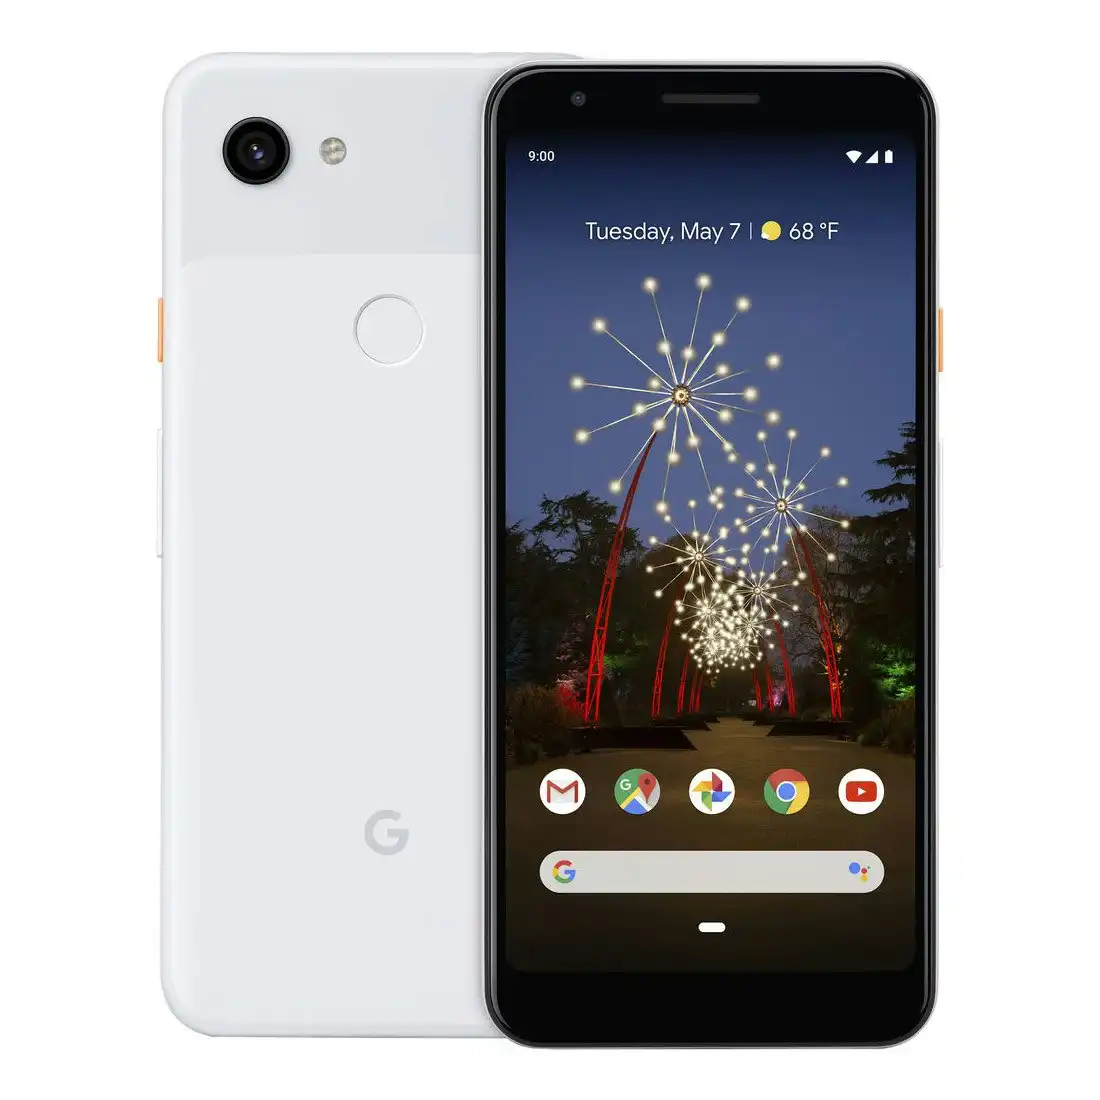 Google Pixel 3a XL (64GB/4GB, 6.0'',Global Version) - Clearly White